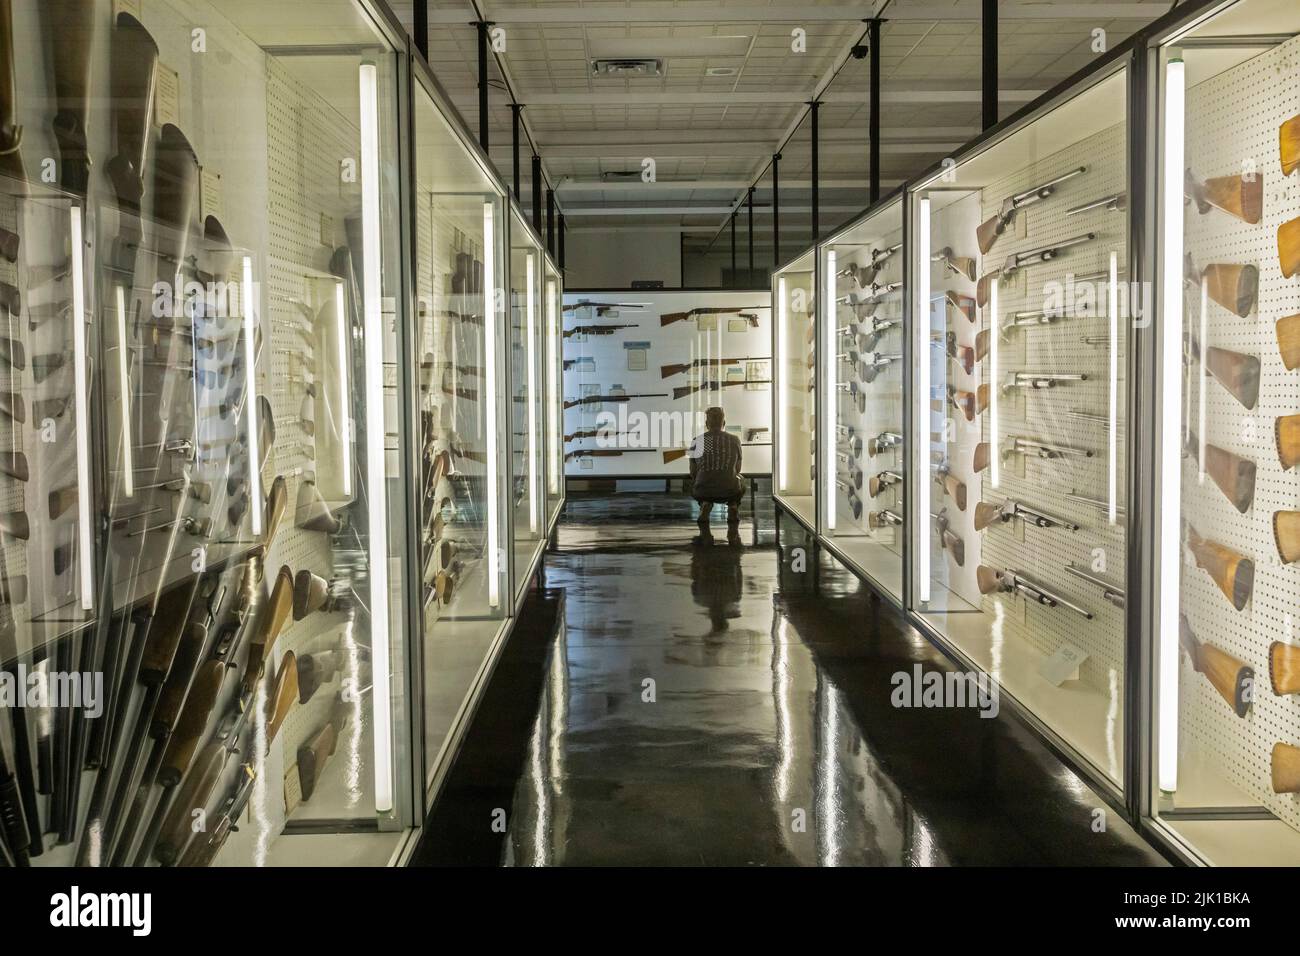 Claremore, Oklahoma - The Davis Arms & Historical Museum, which displays what it calls the world's largest private firearms collection. The weapons or Stock Photo